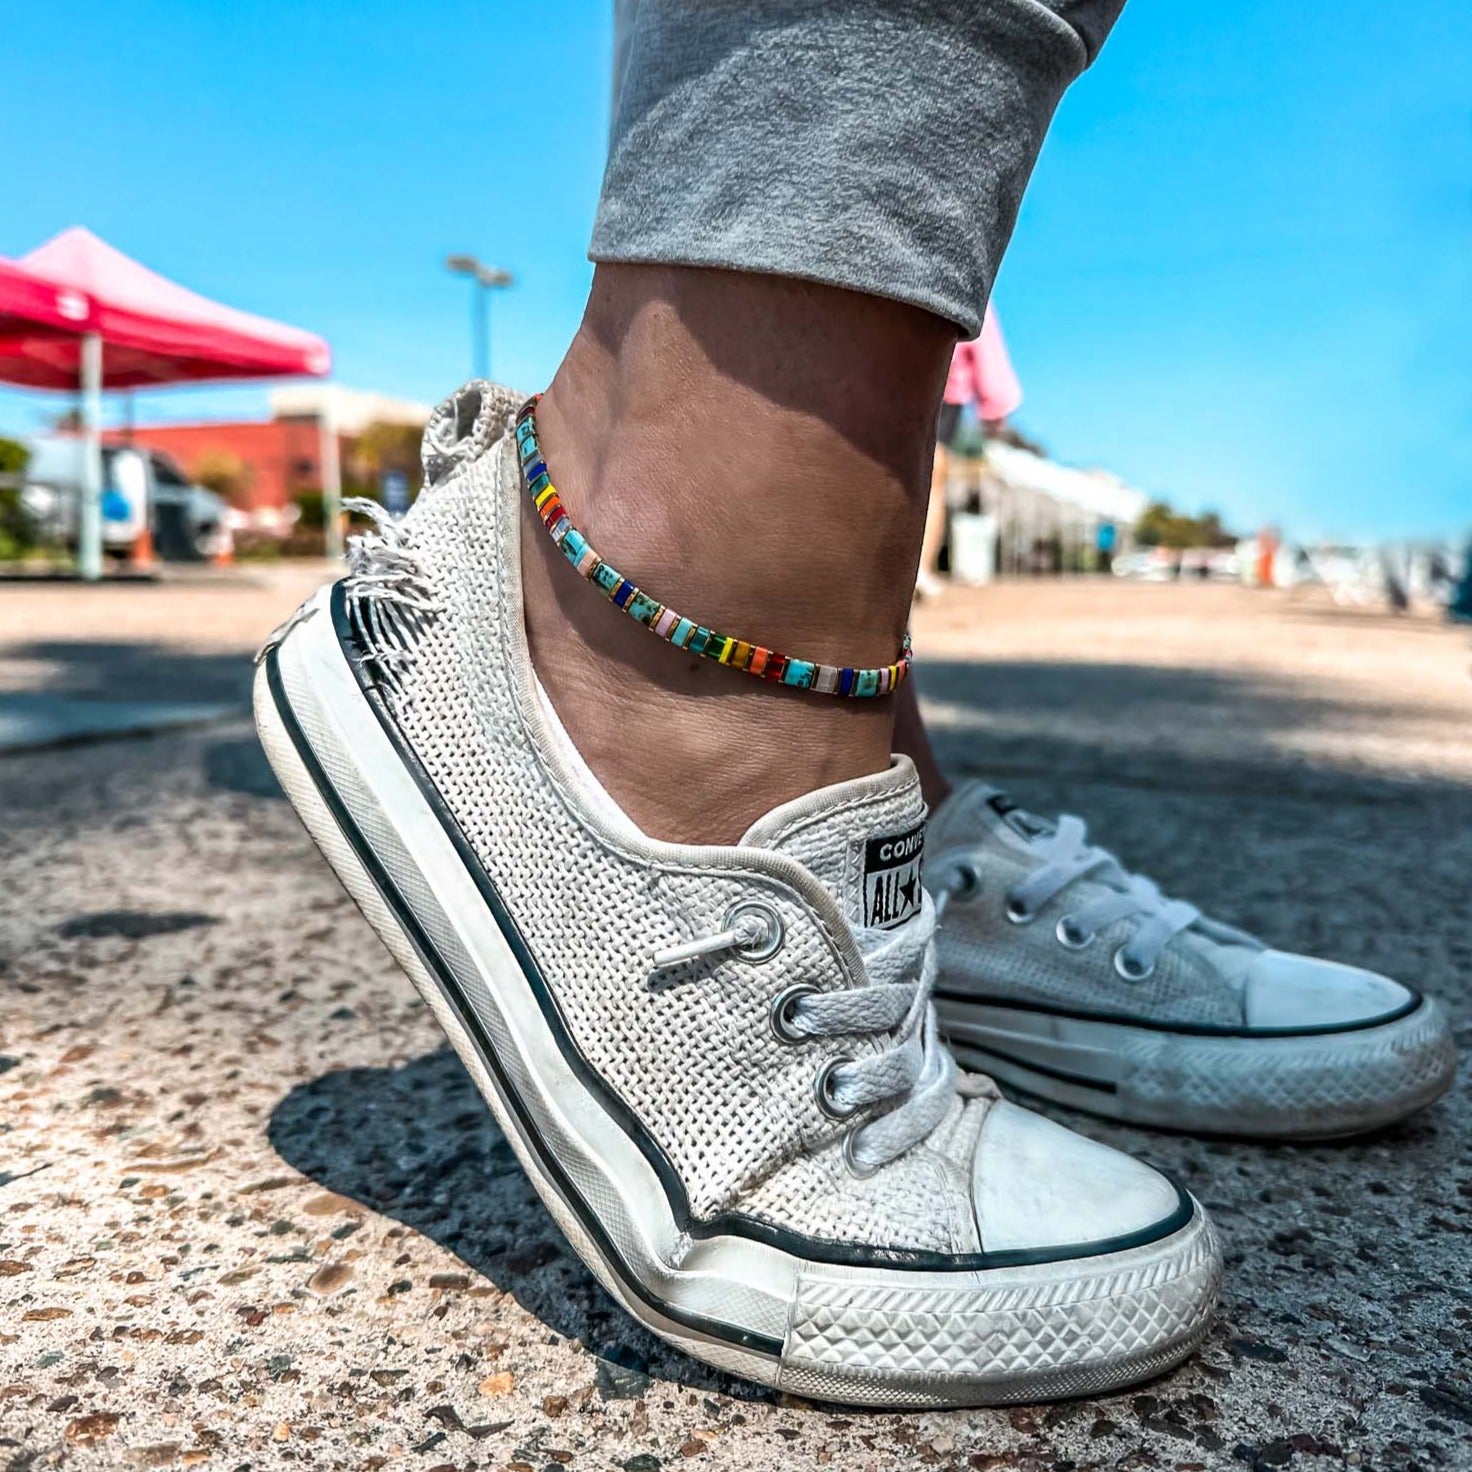 Tila beads ankle bracelets. Handmade colorful beaded anklet made by Born to Rock Jewelry. Family-owned surf jewelry based in San Diego, California.